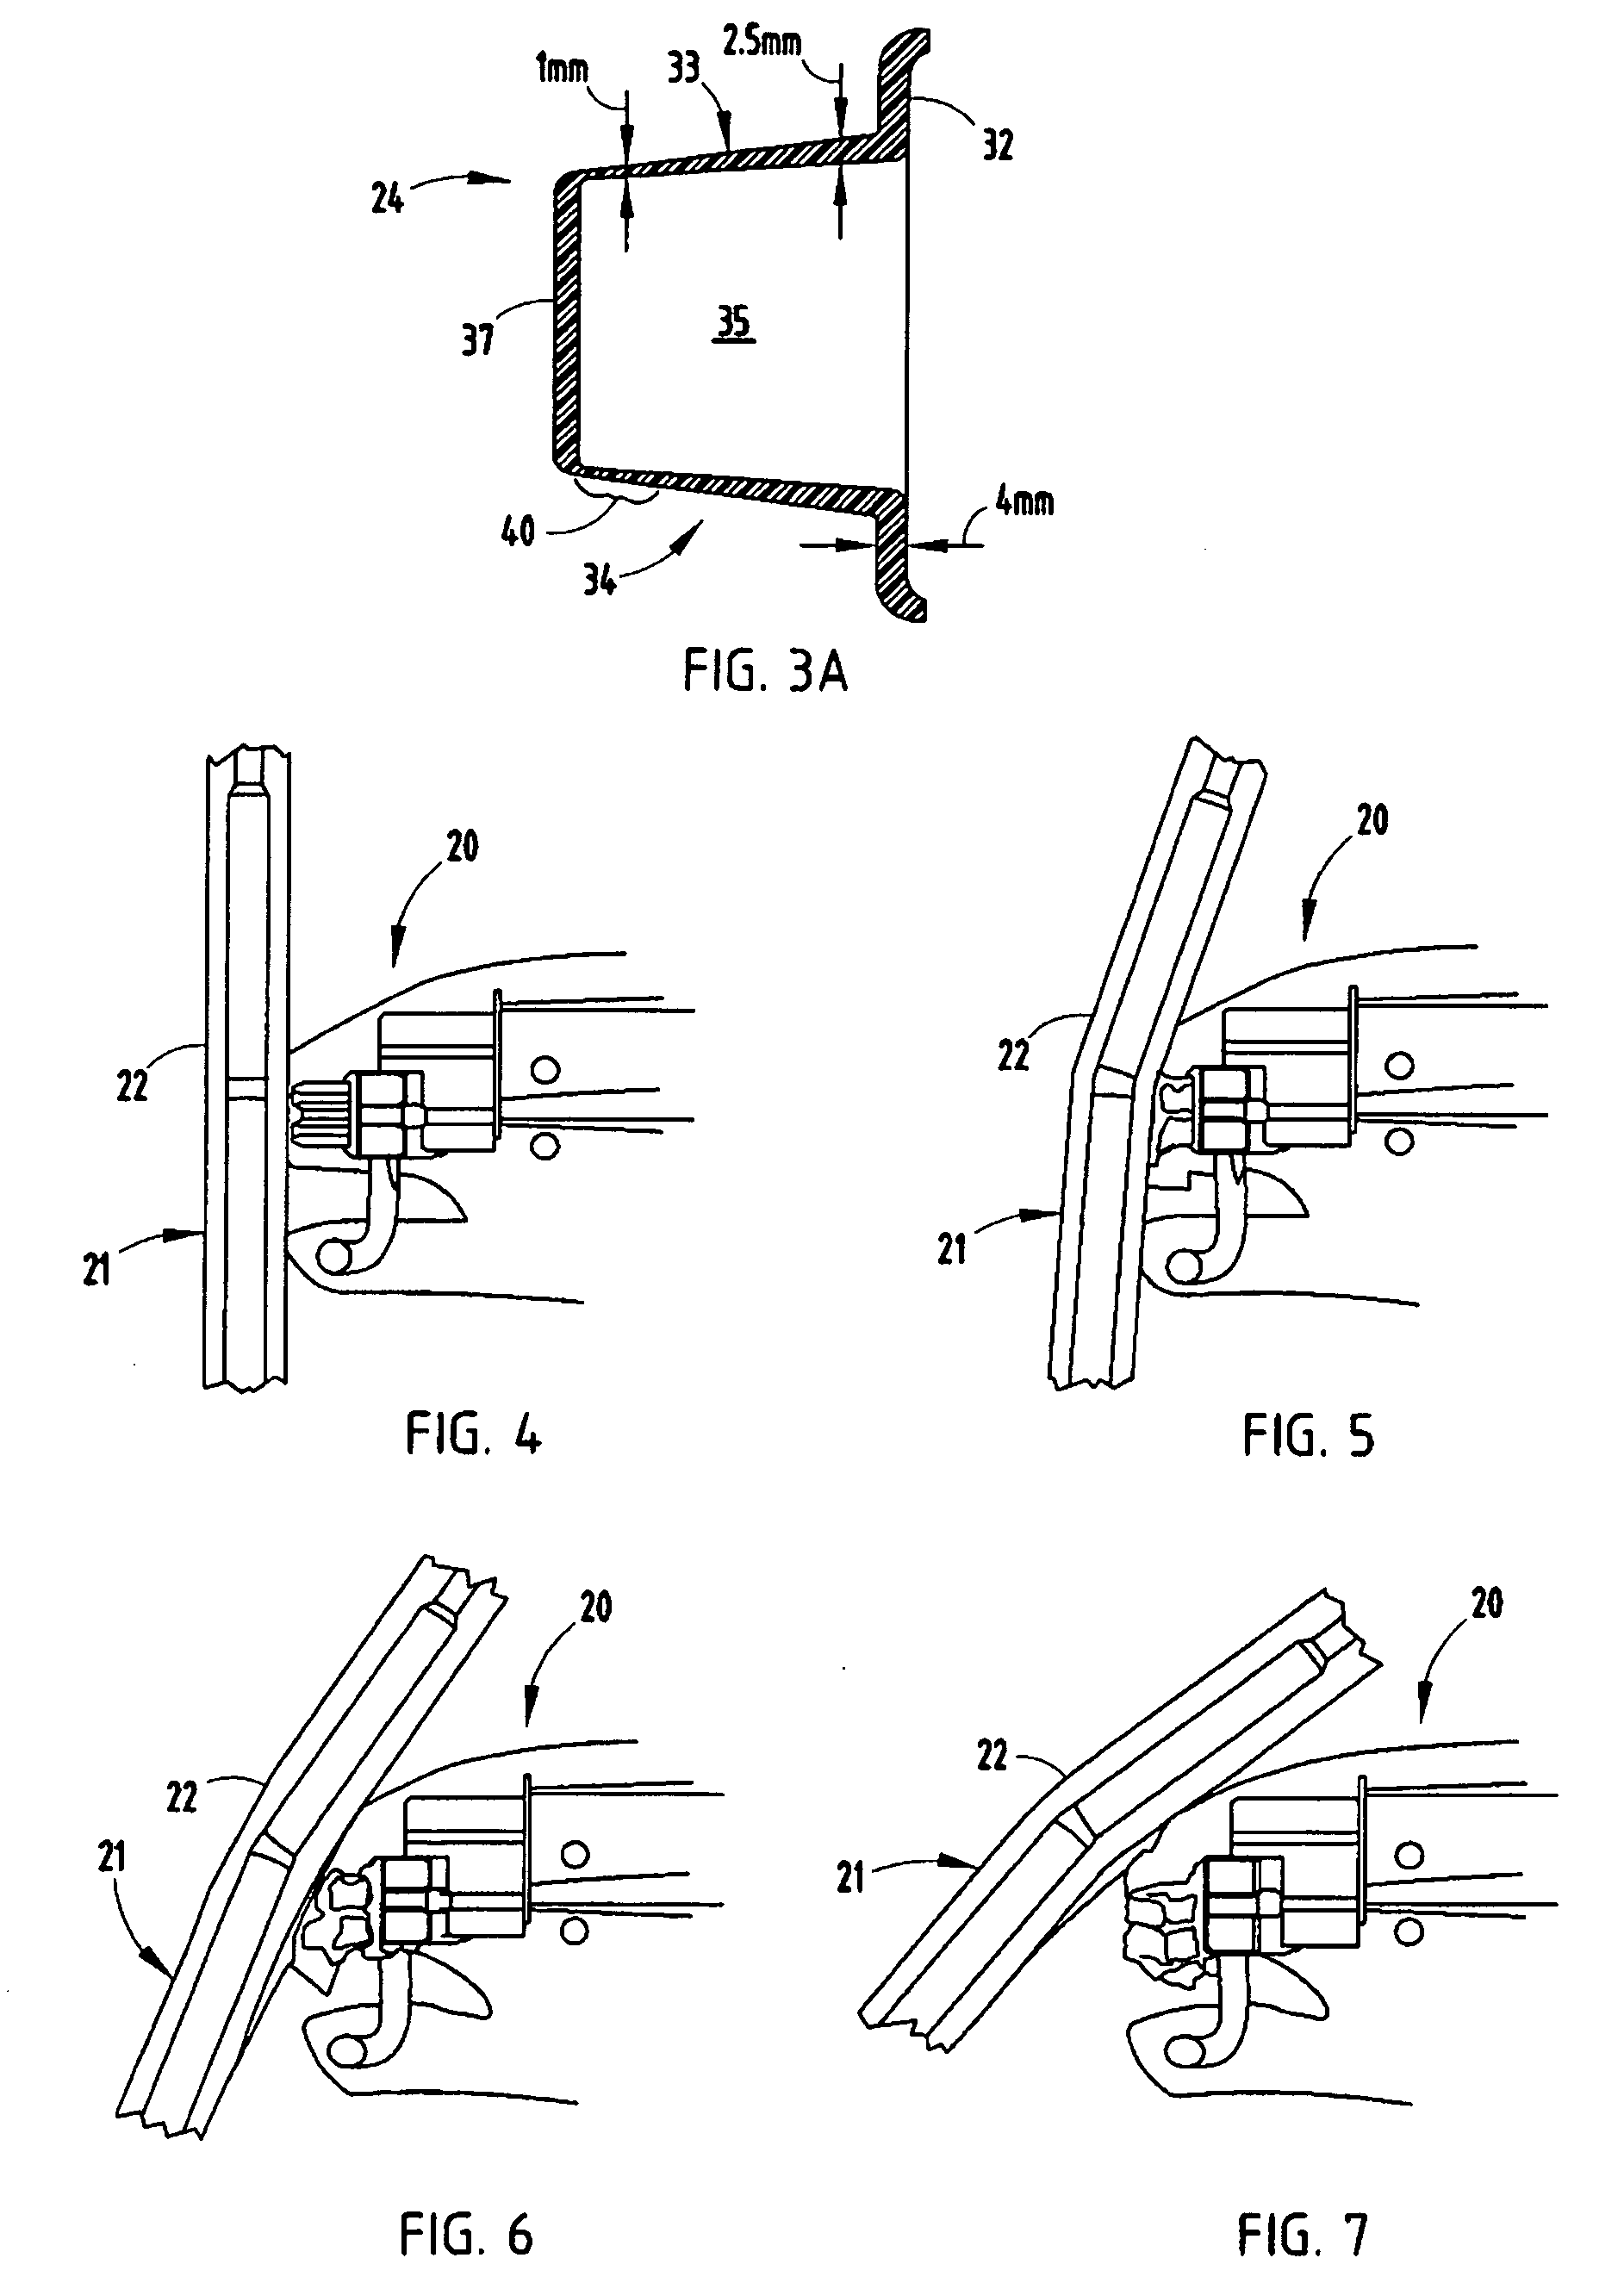 Bumper for pedestrian impact having thermoformed energy absorber